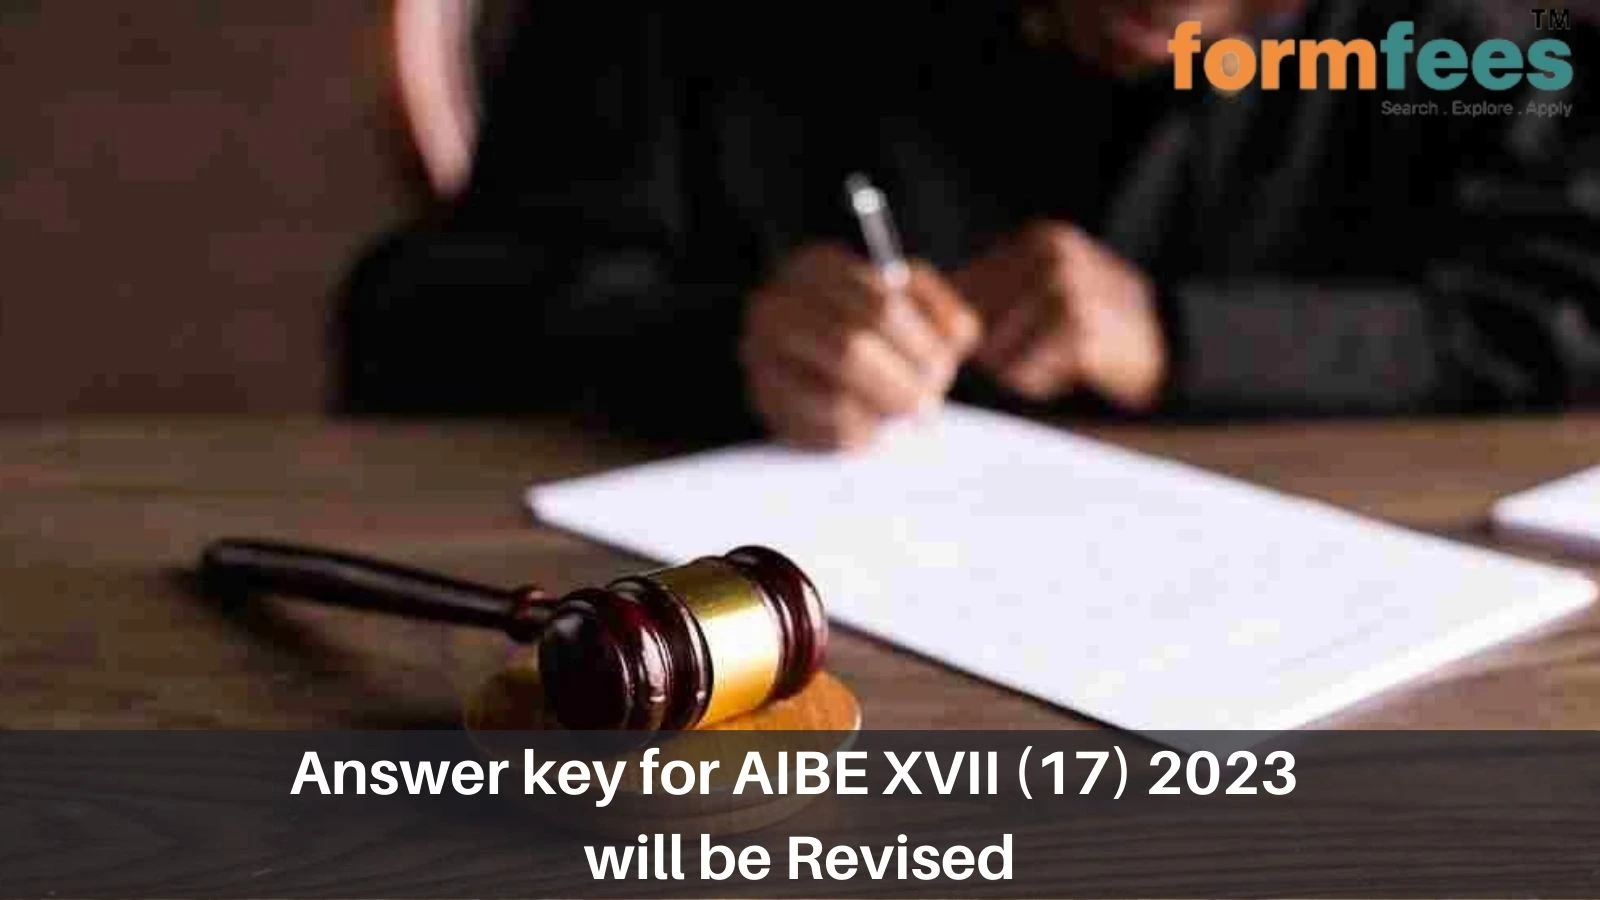 Answer key for AIBE XVII (17) 2023 will be Revised